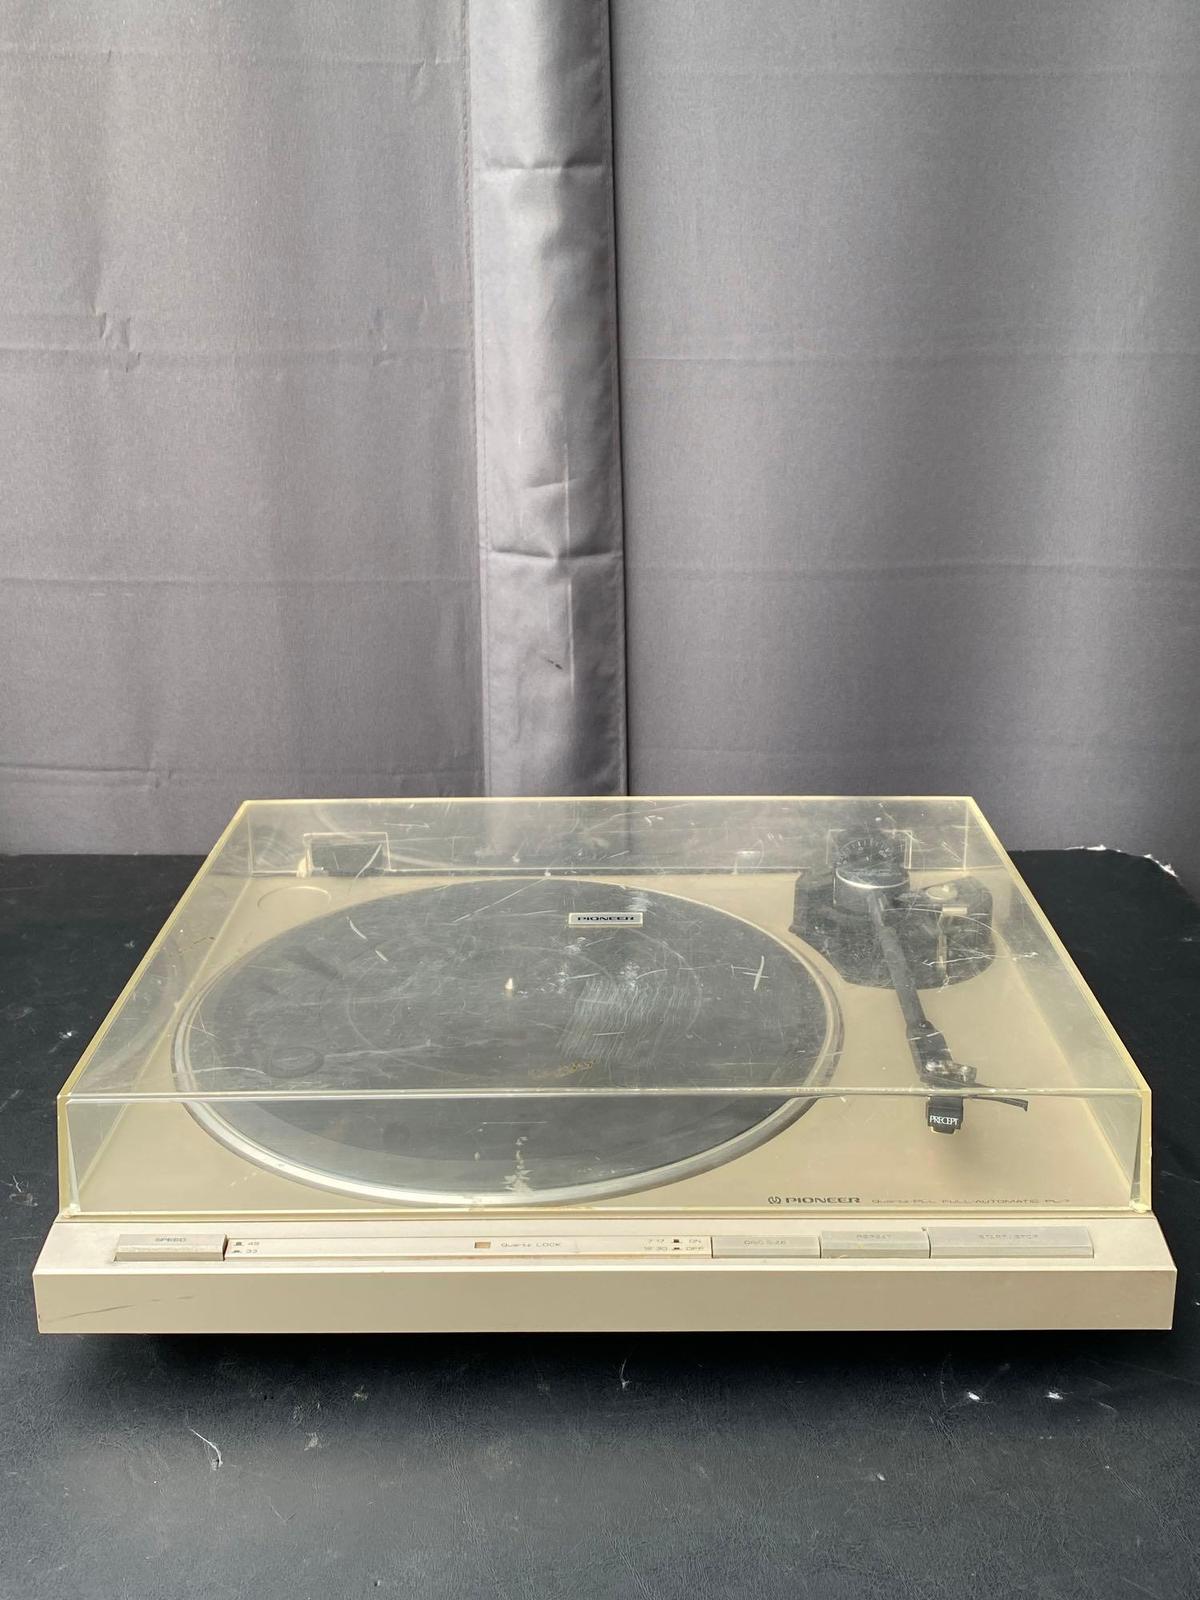 PIONEER Direct Drive Stereo Turntable